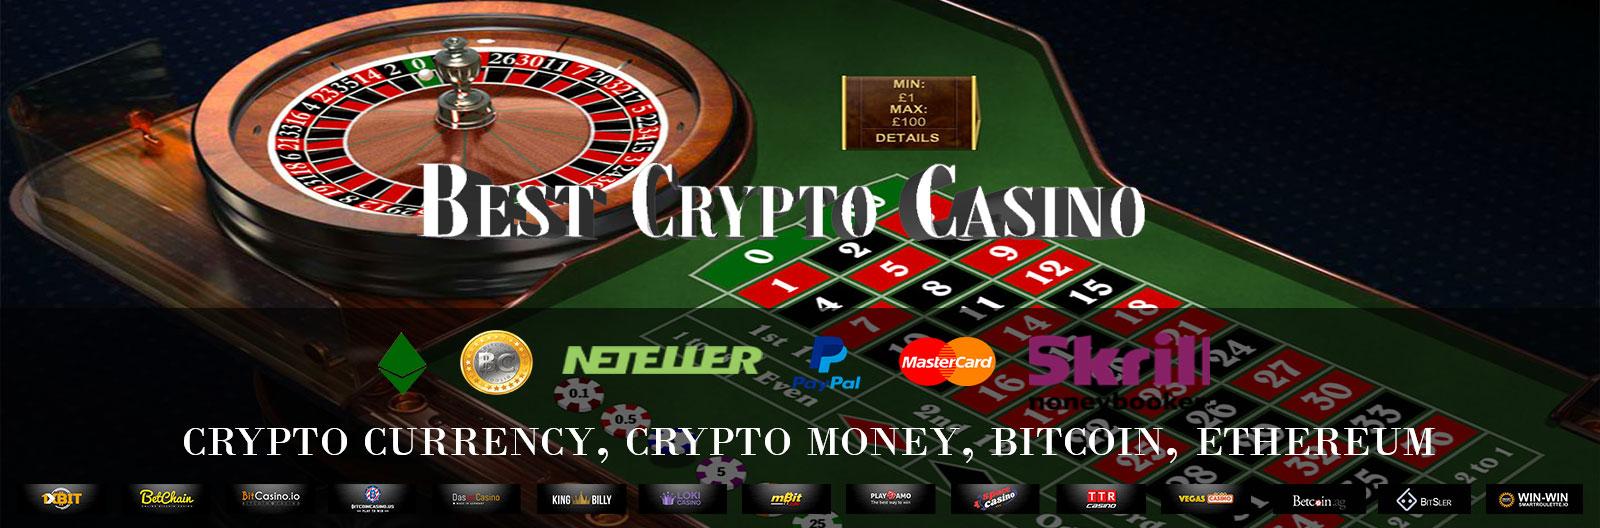 Free bitcoin casino app with real prizes